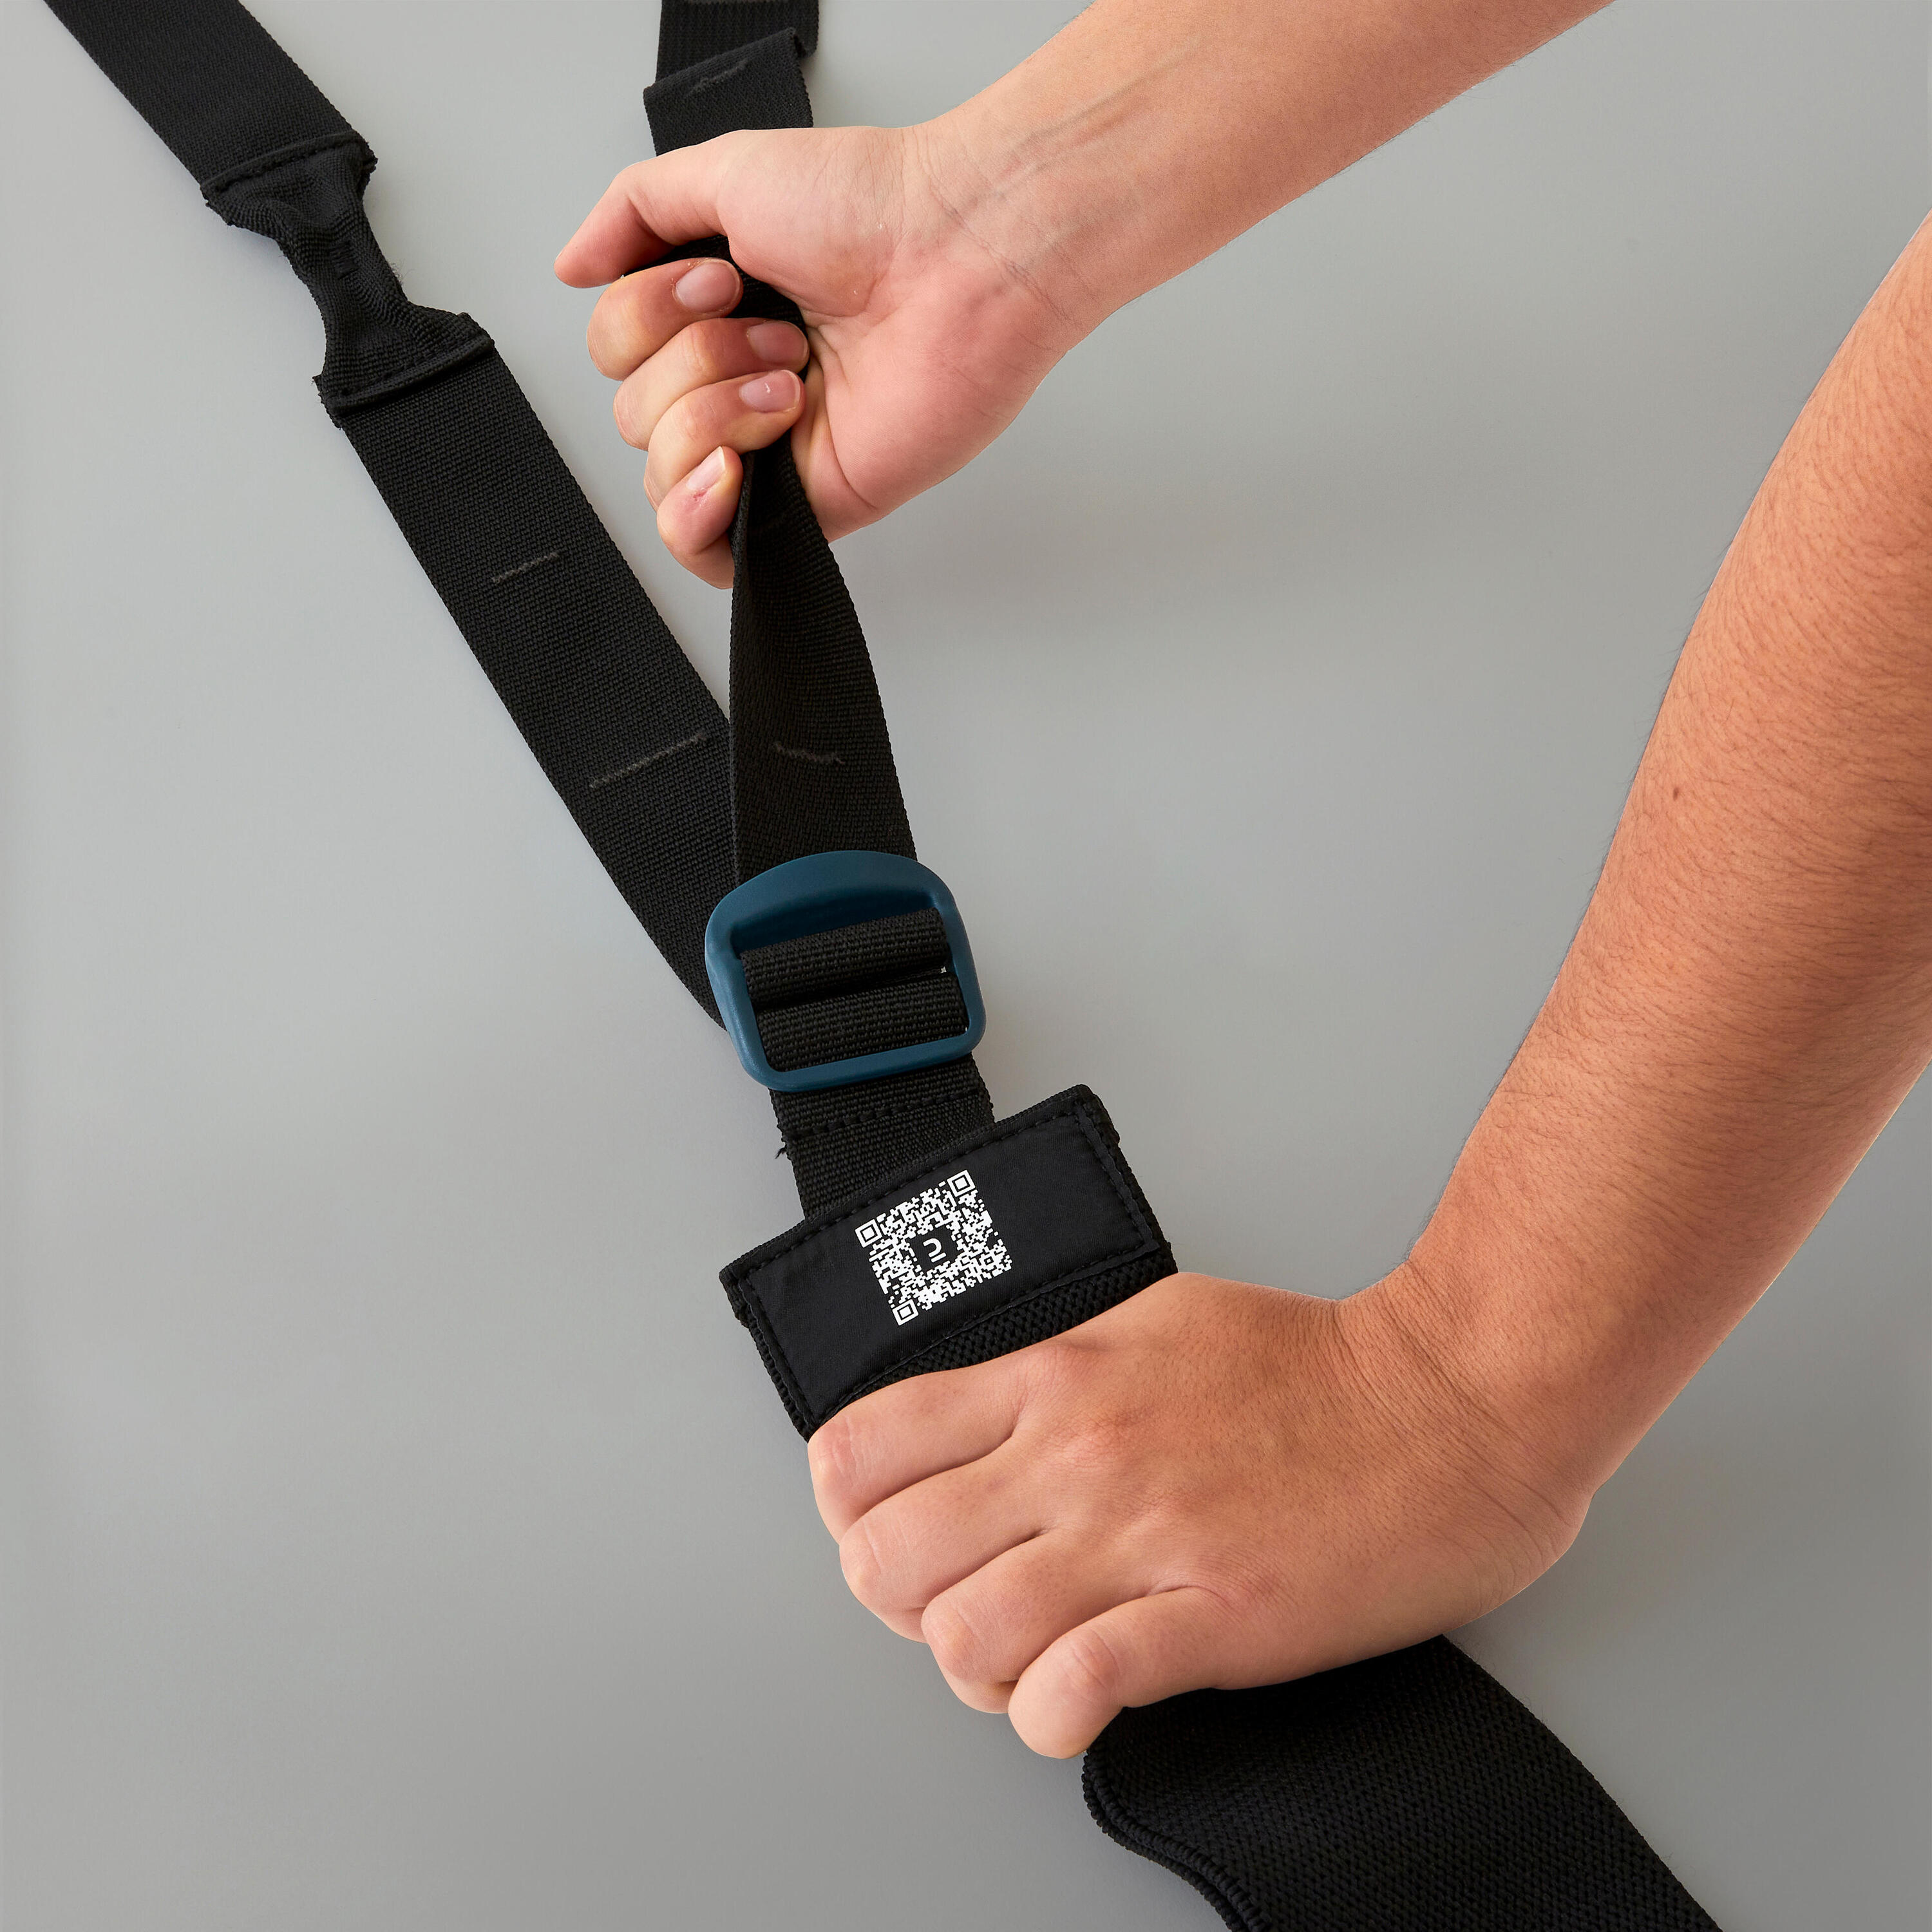 Adjustable Band for Pull-Up Assistance 7/9